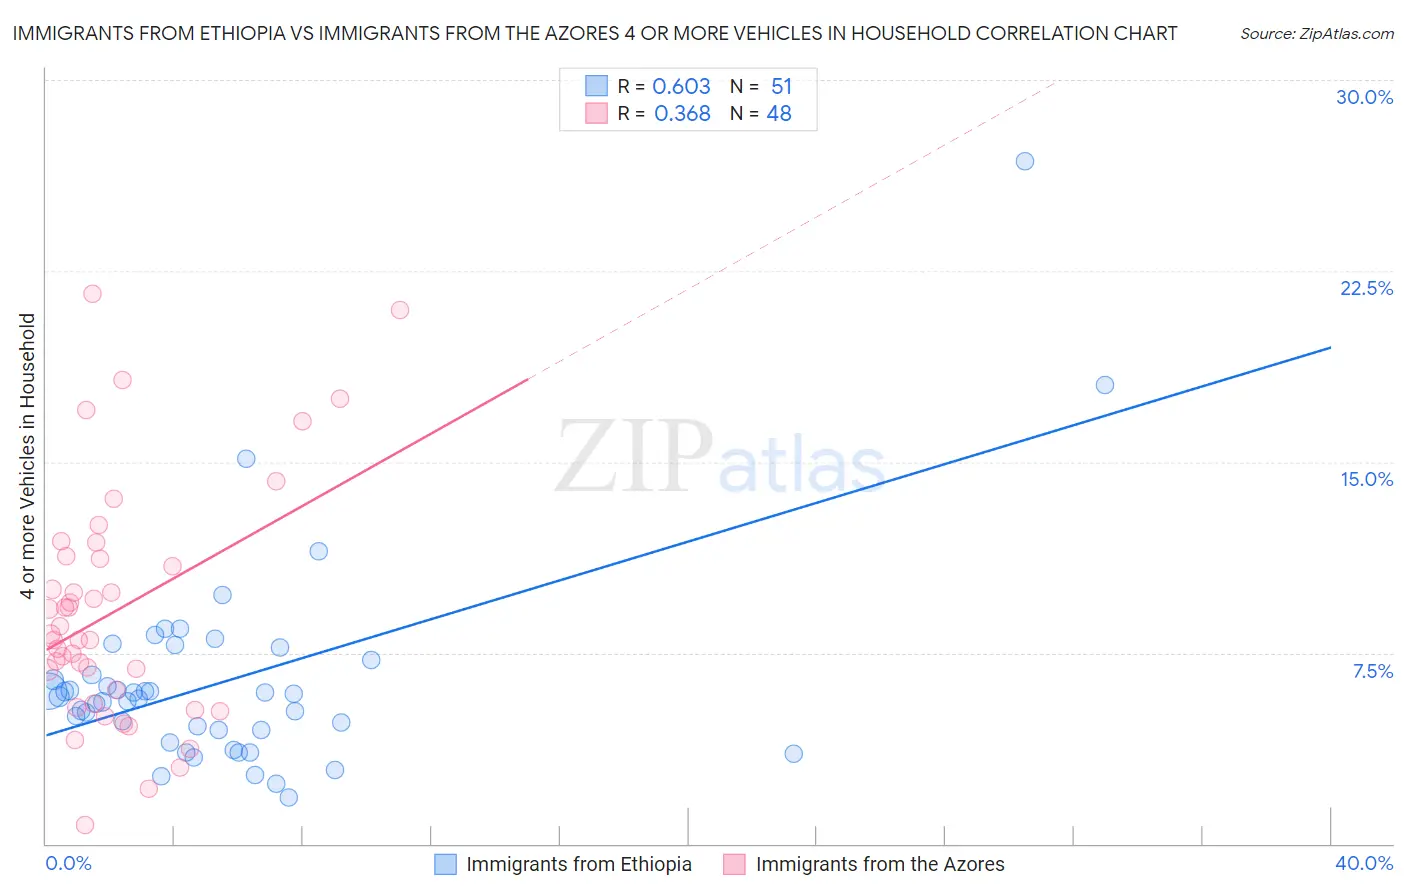 Immigrants from Ethiopia vs Immigrants from the Azores 4 or more Vehicles in Household